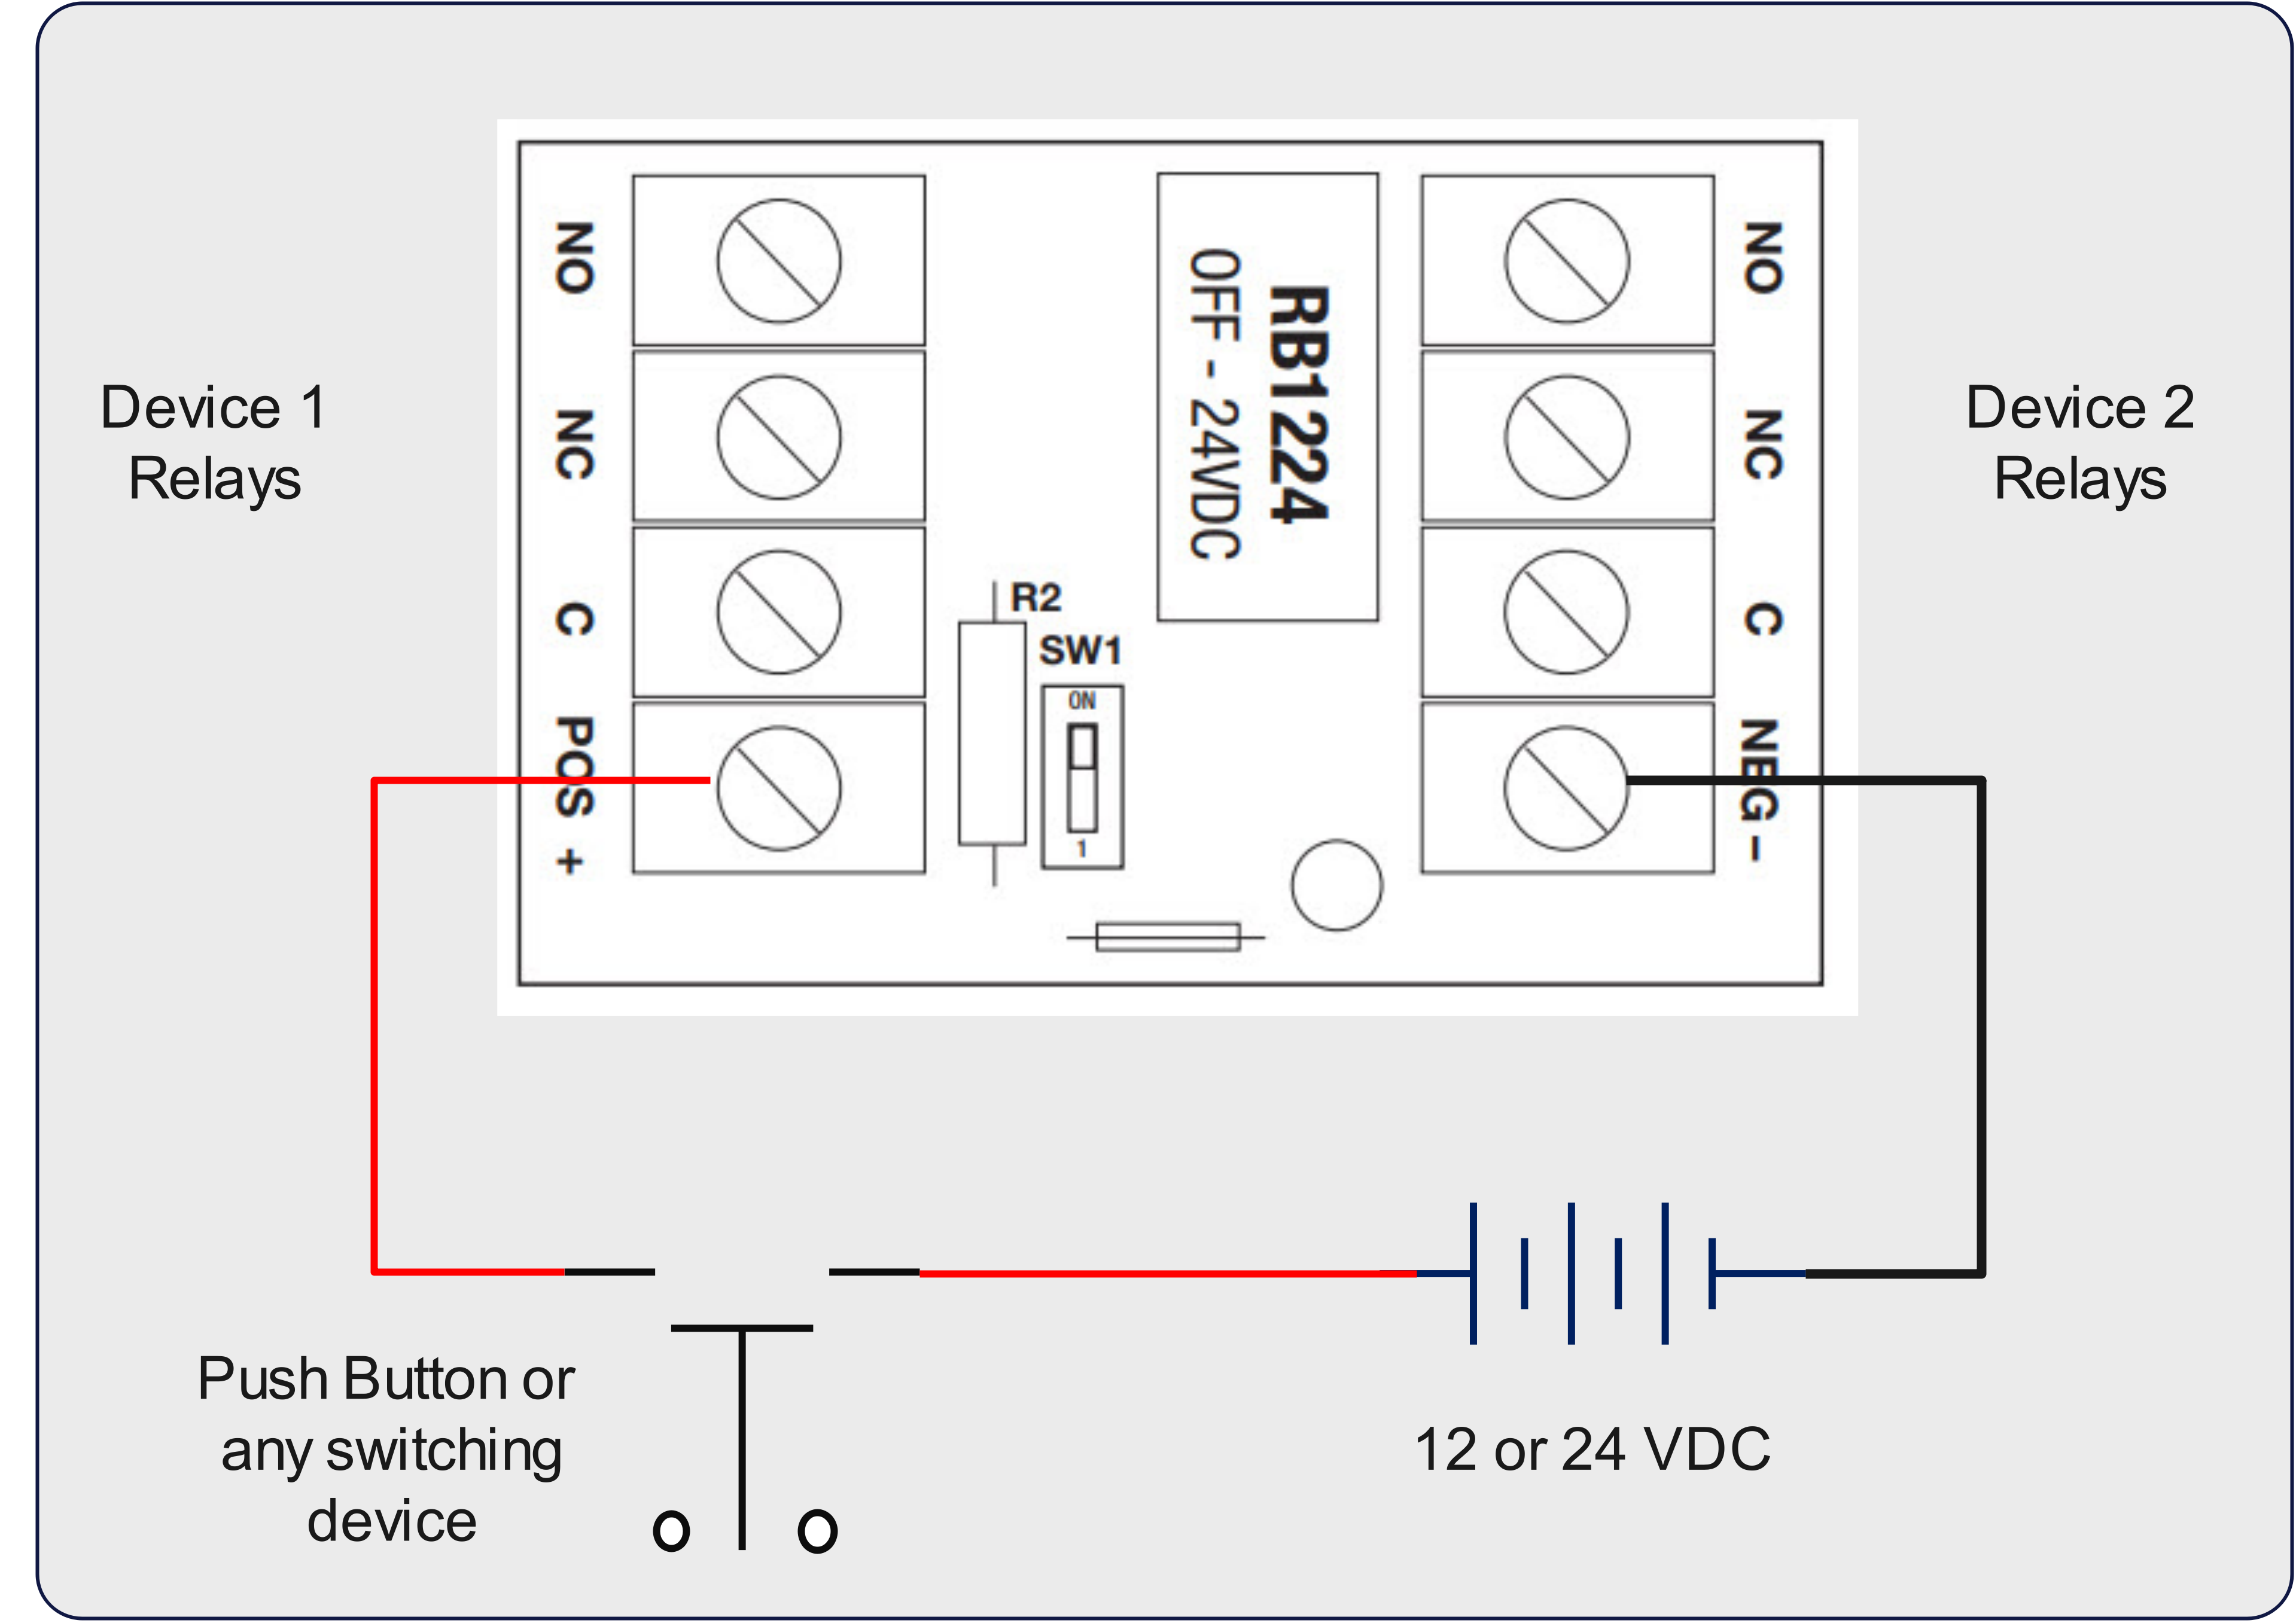 A single button is wired in series with a power source to energize the power terminals of a relay board